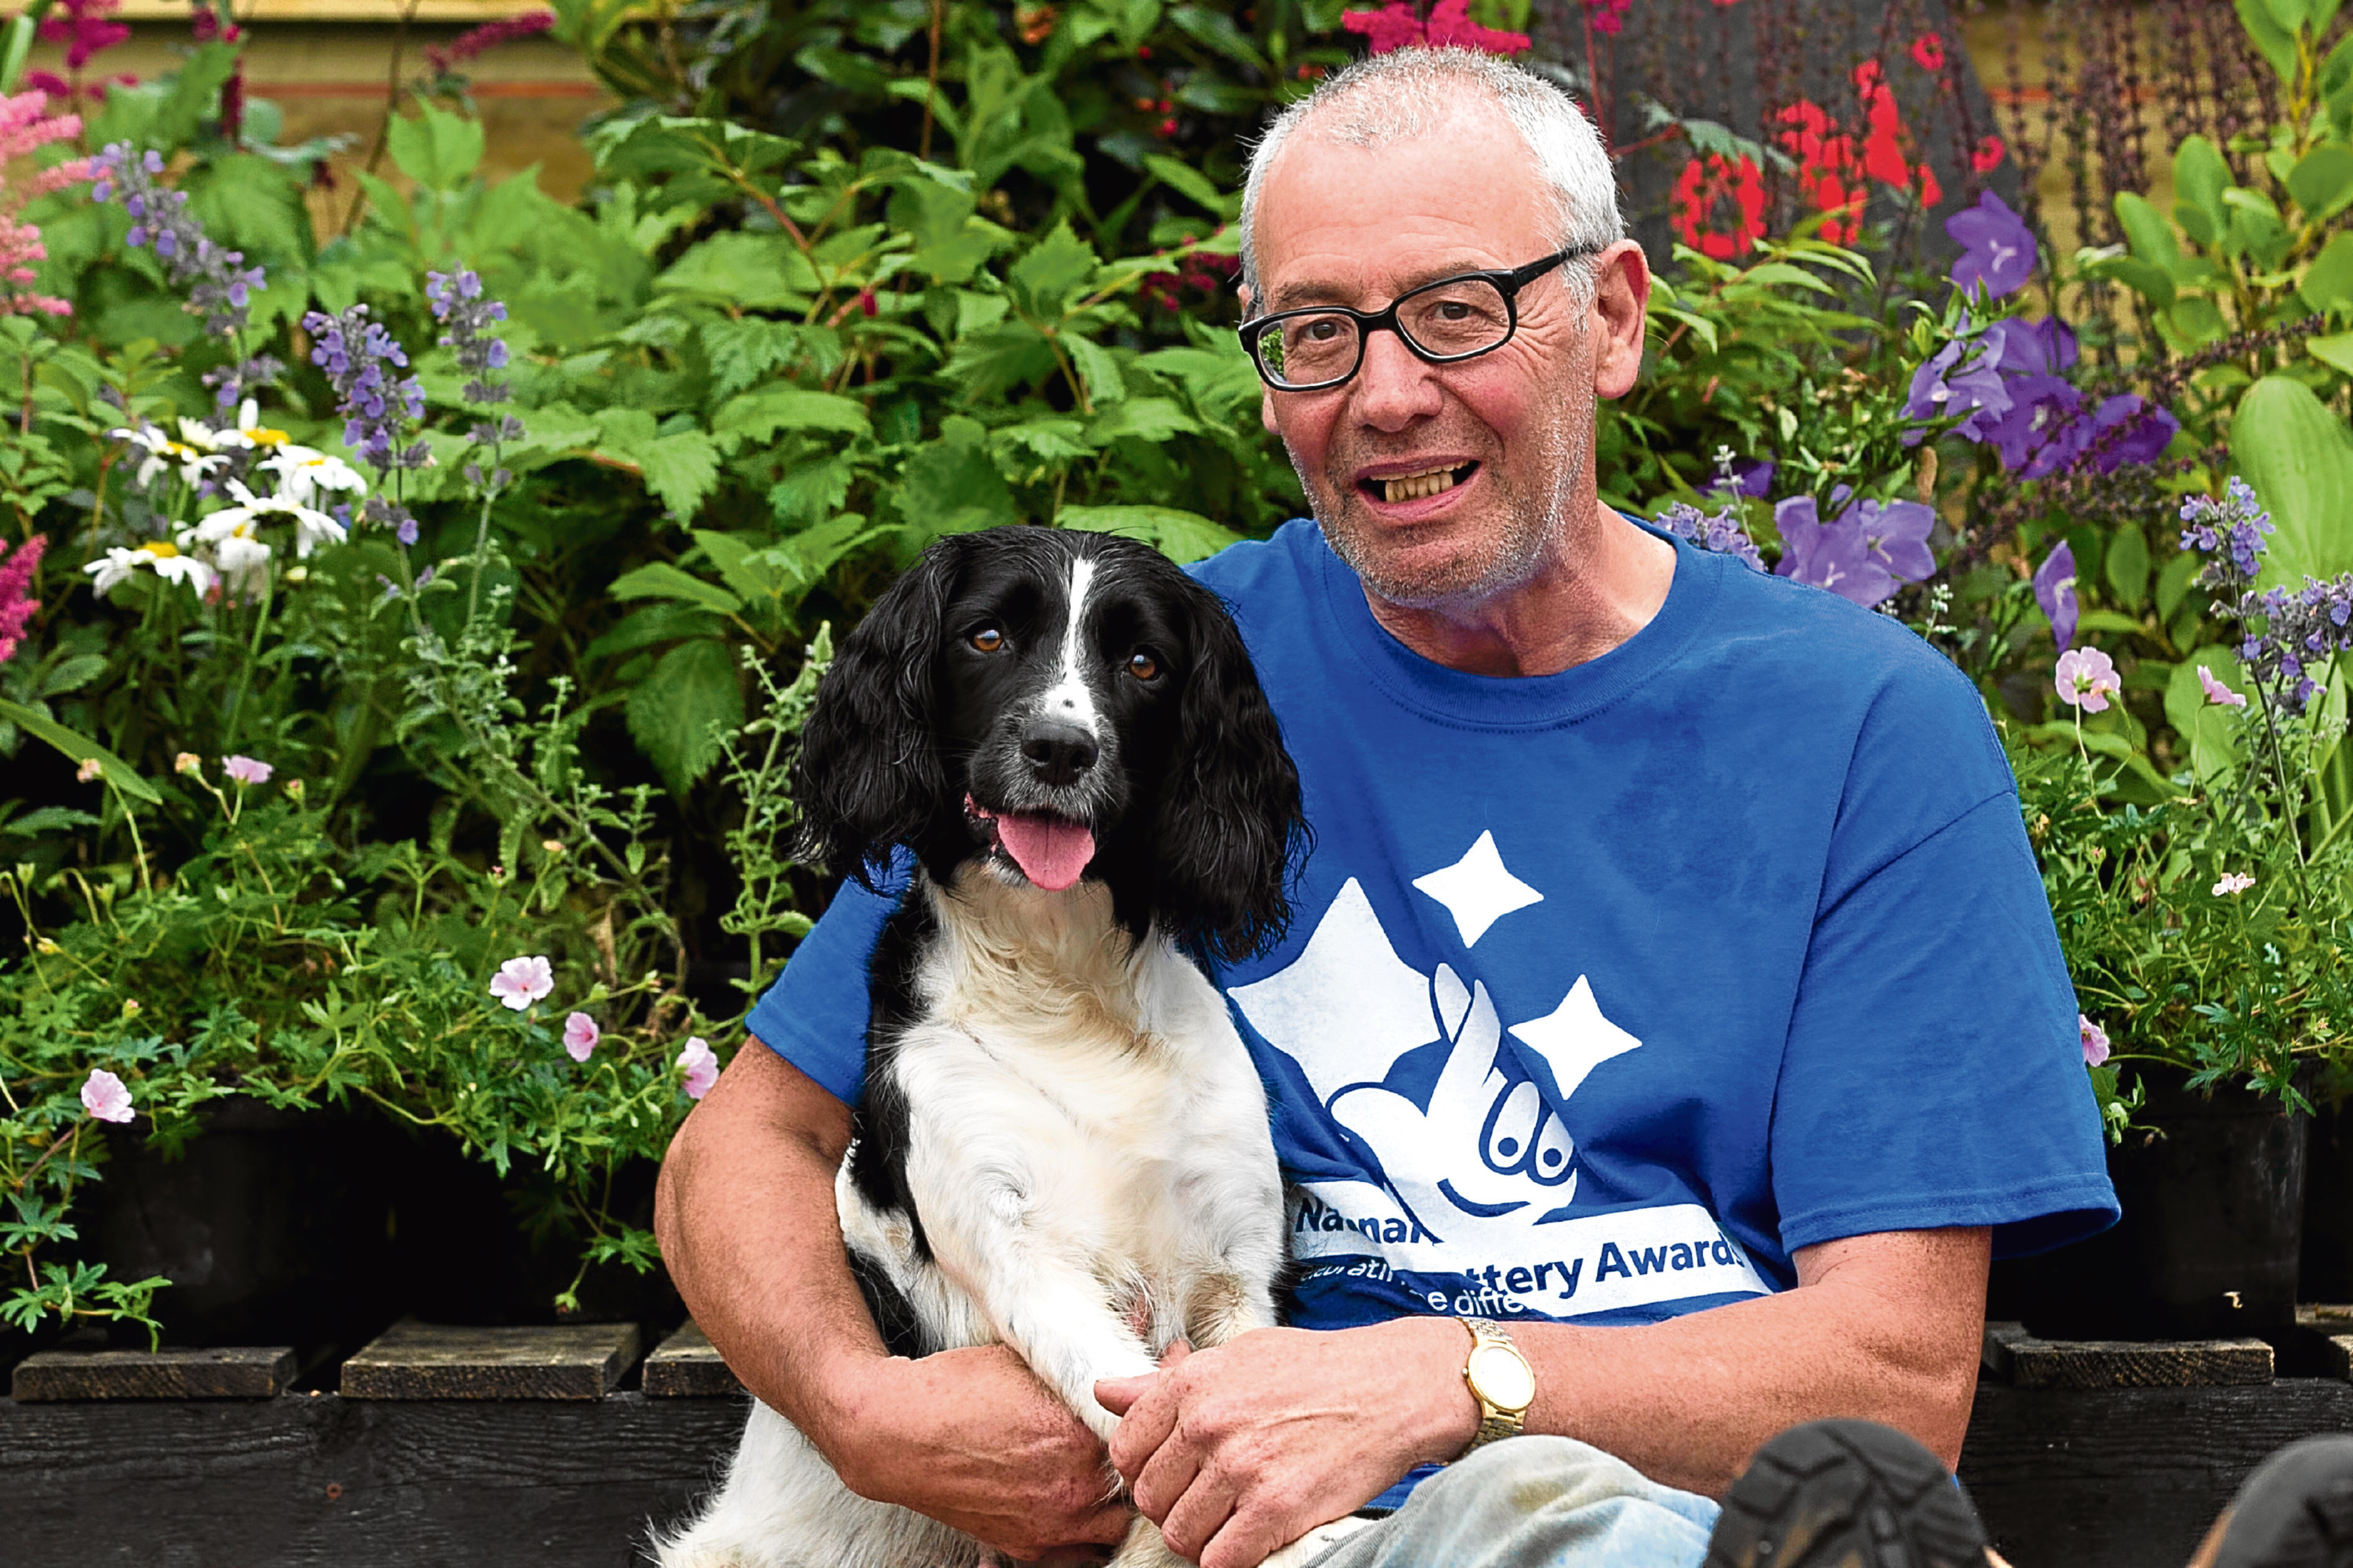 Jimmy was given Bracken by charity Bravehound, to help with his post traumatic stress disorder. (Andrew Cawley, Sunday Post)